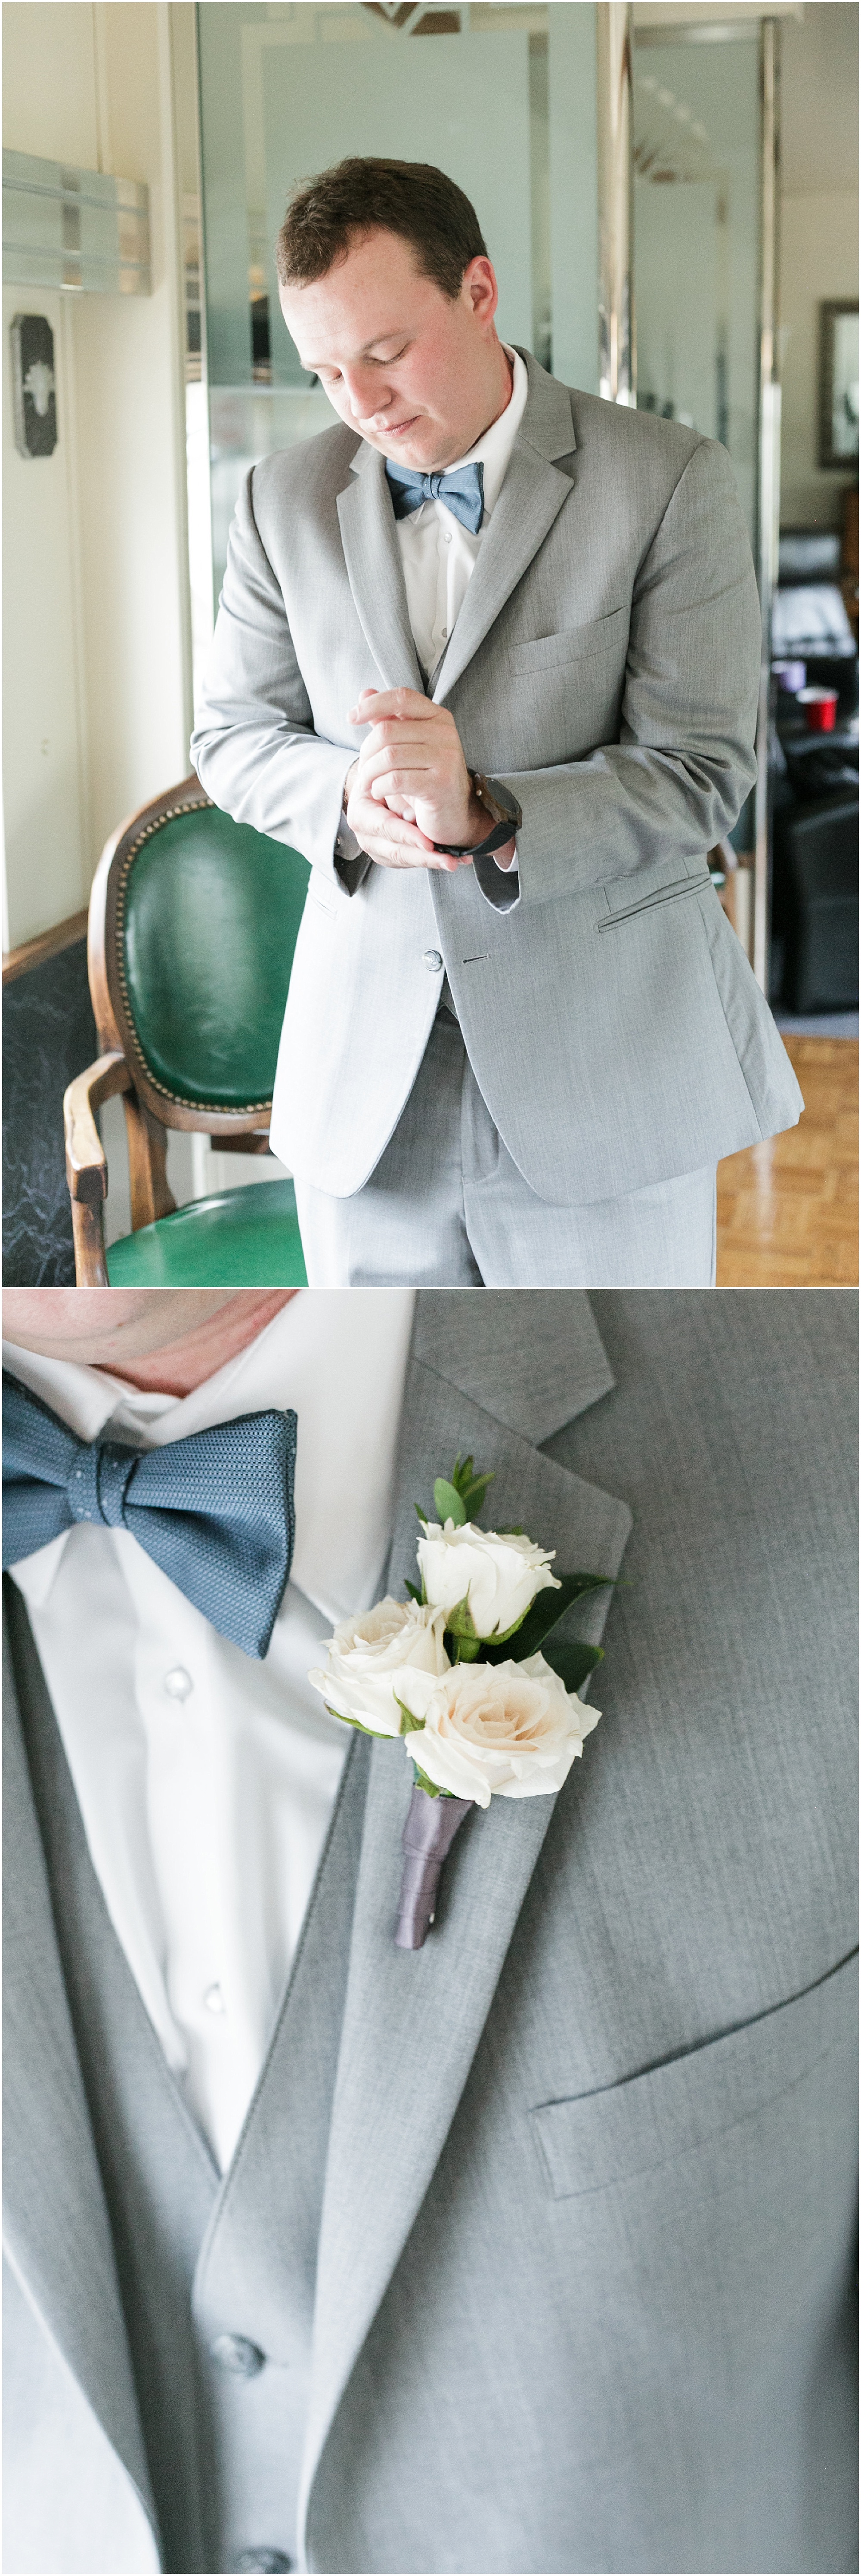 Groom putting on a new watch his bride gave him for their wedding day and showing his white rose boutonnière on his jacket.